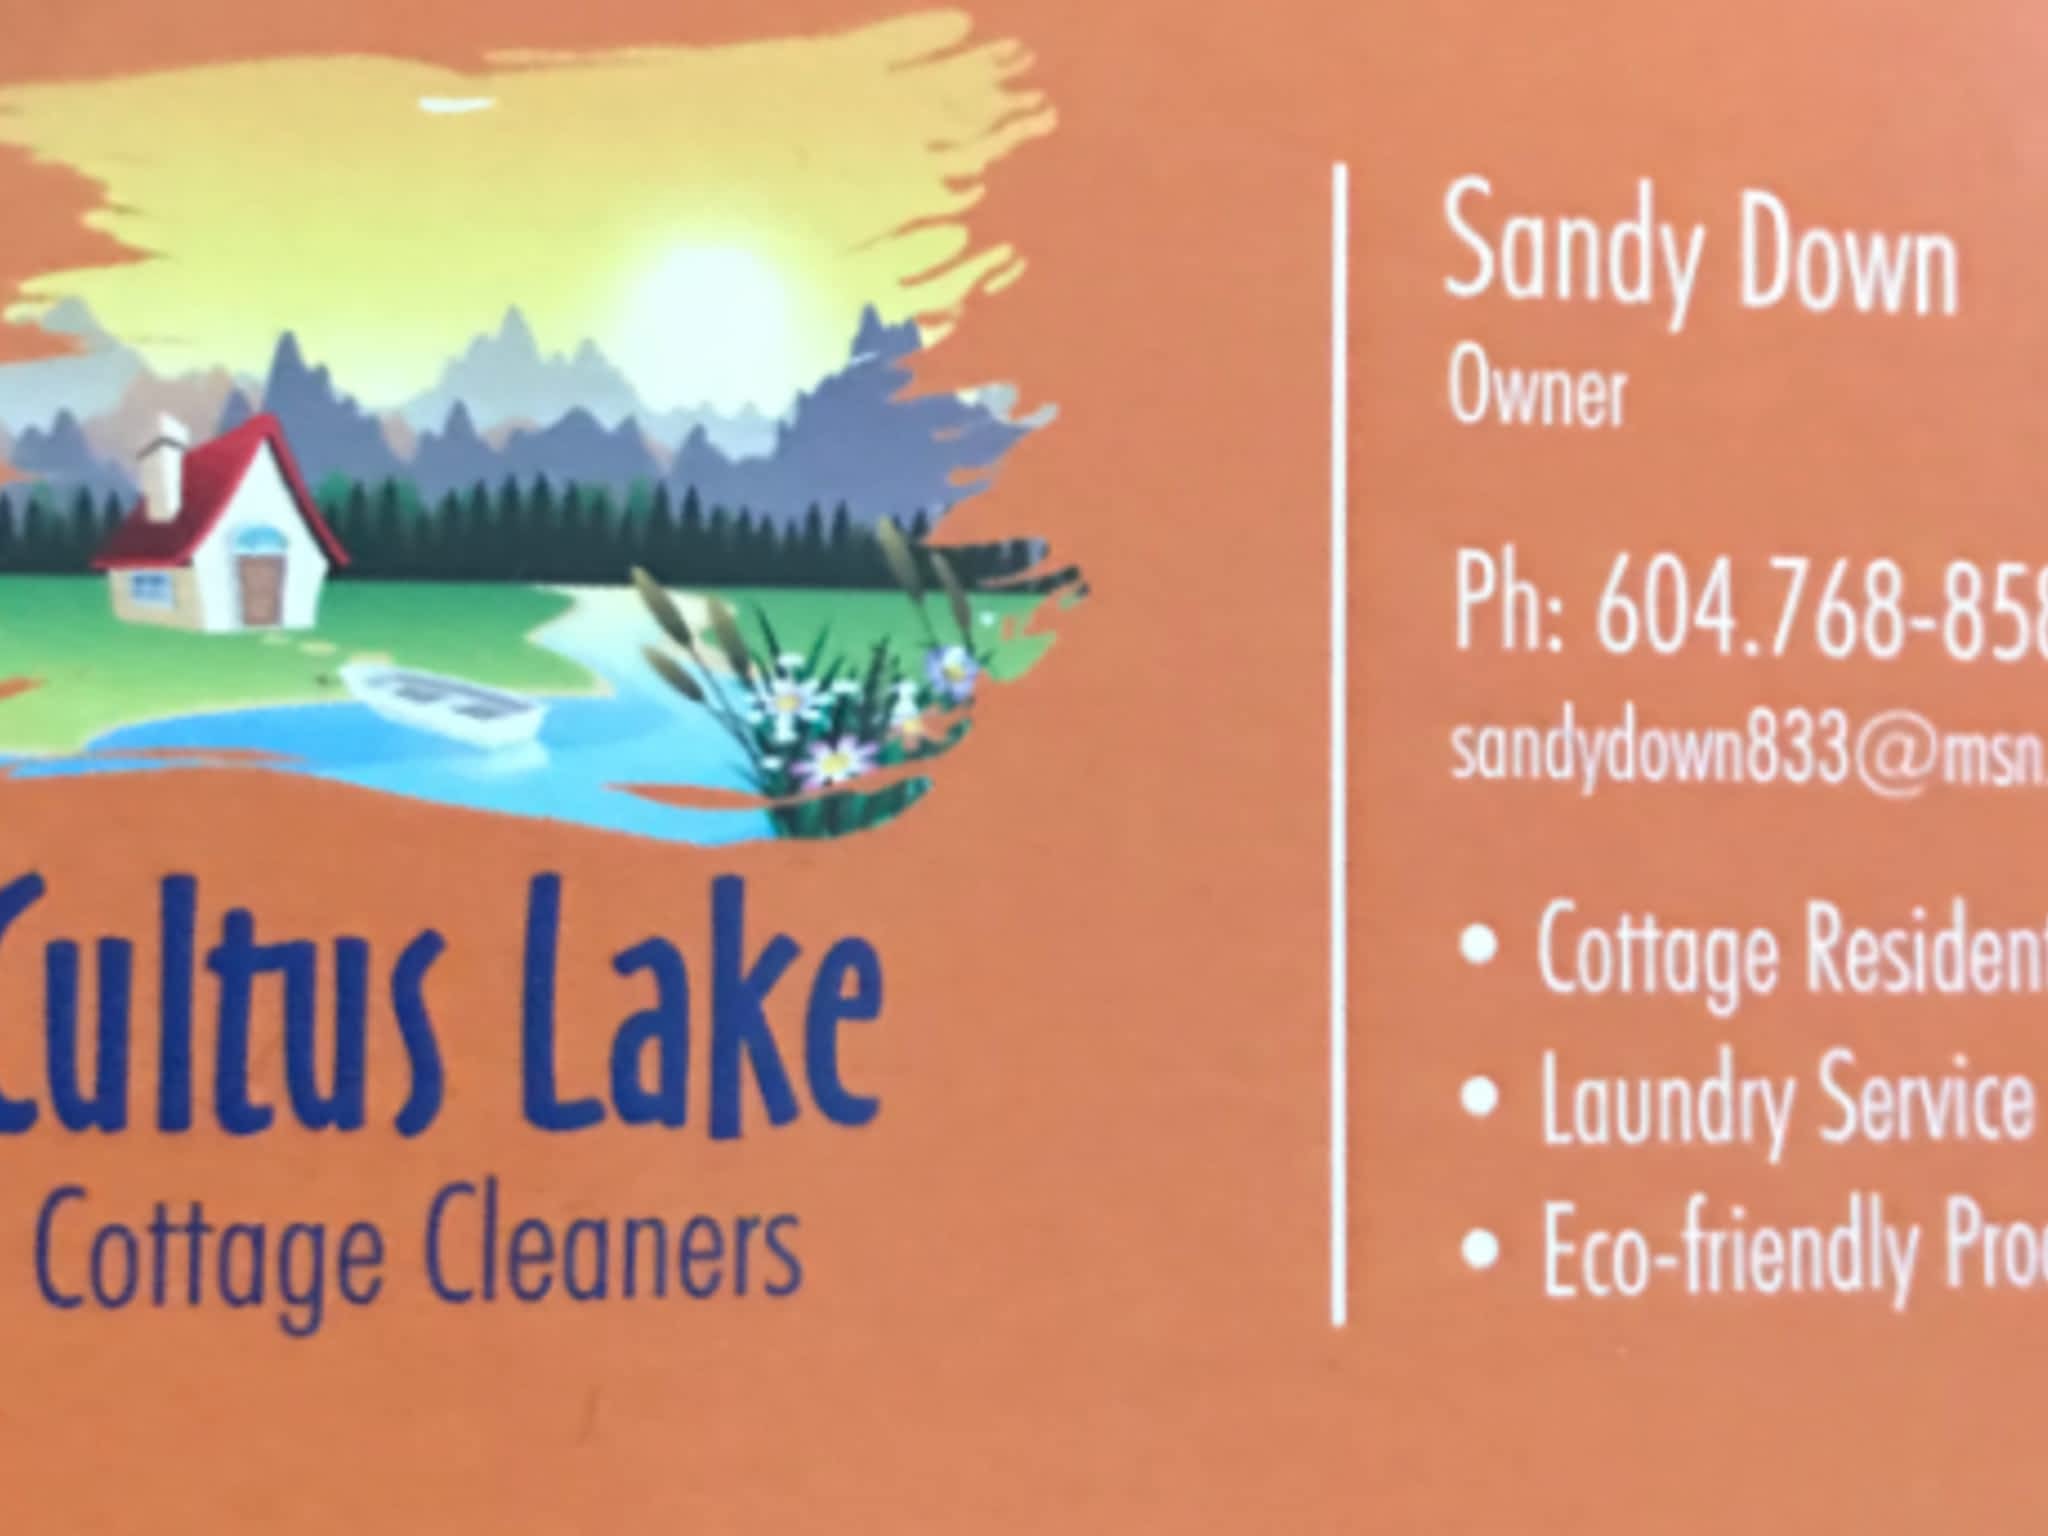 photo Cultas Lake Cottage Cleaners